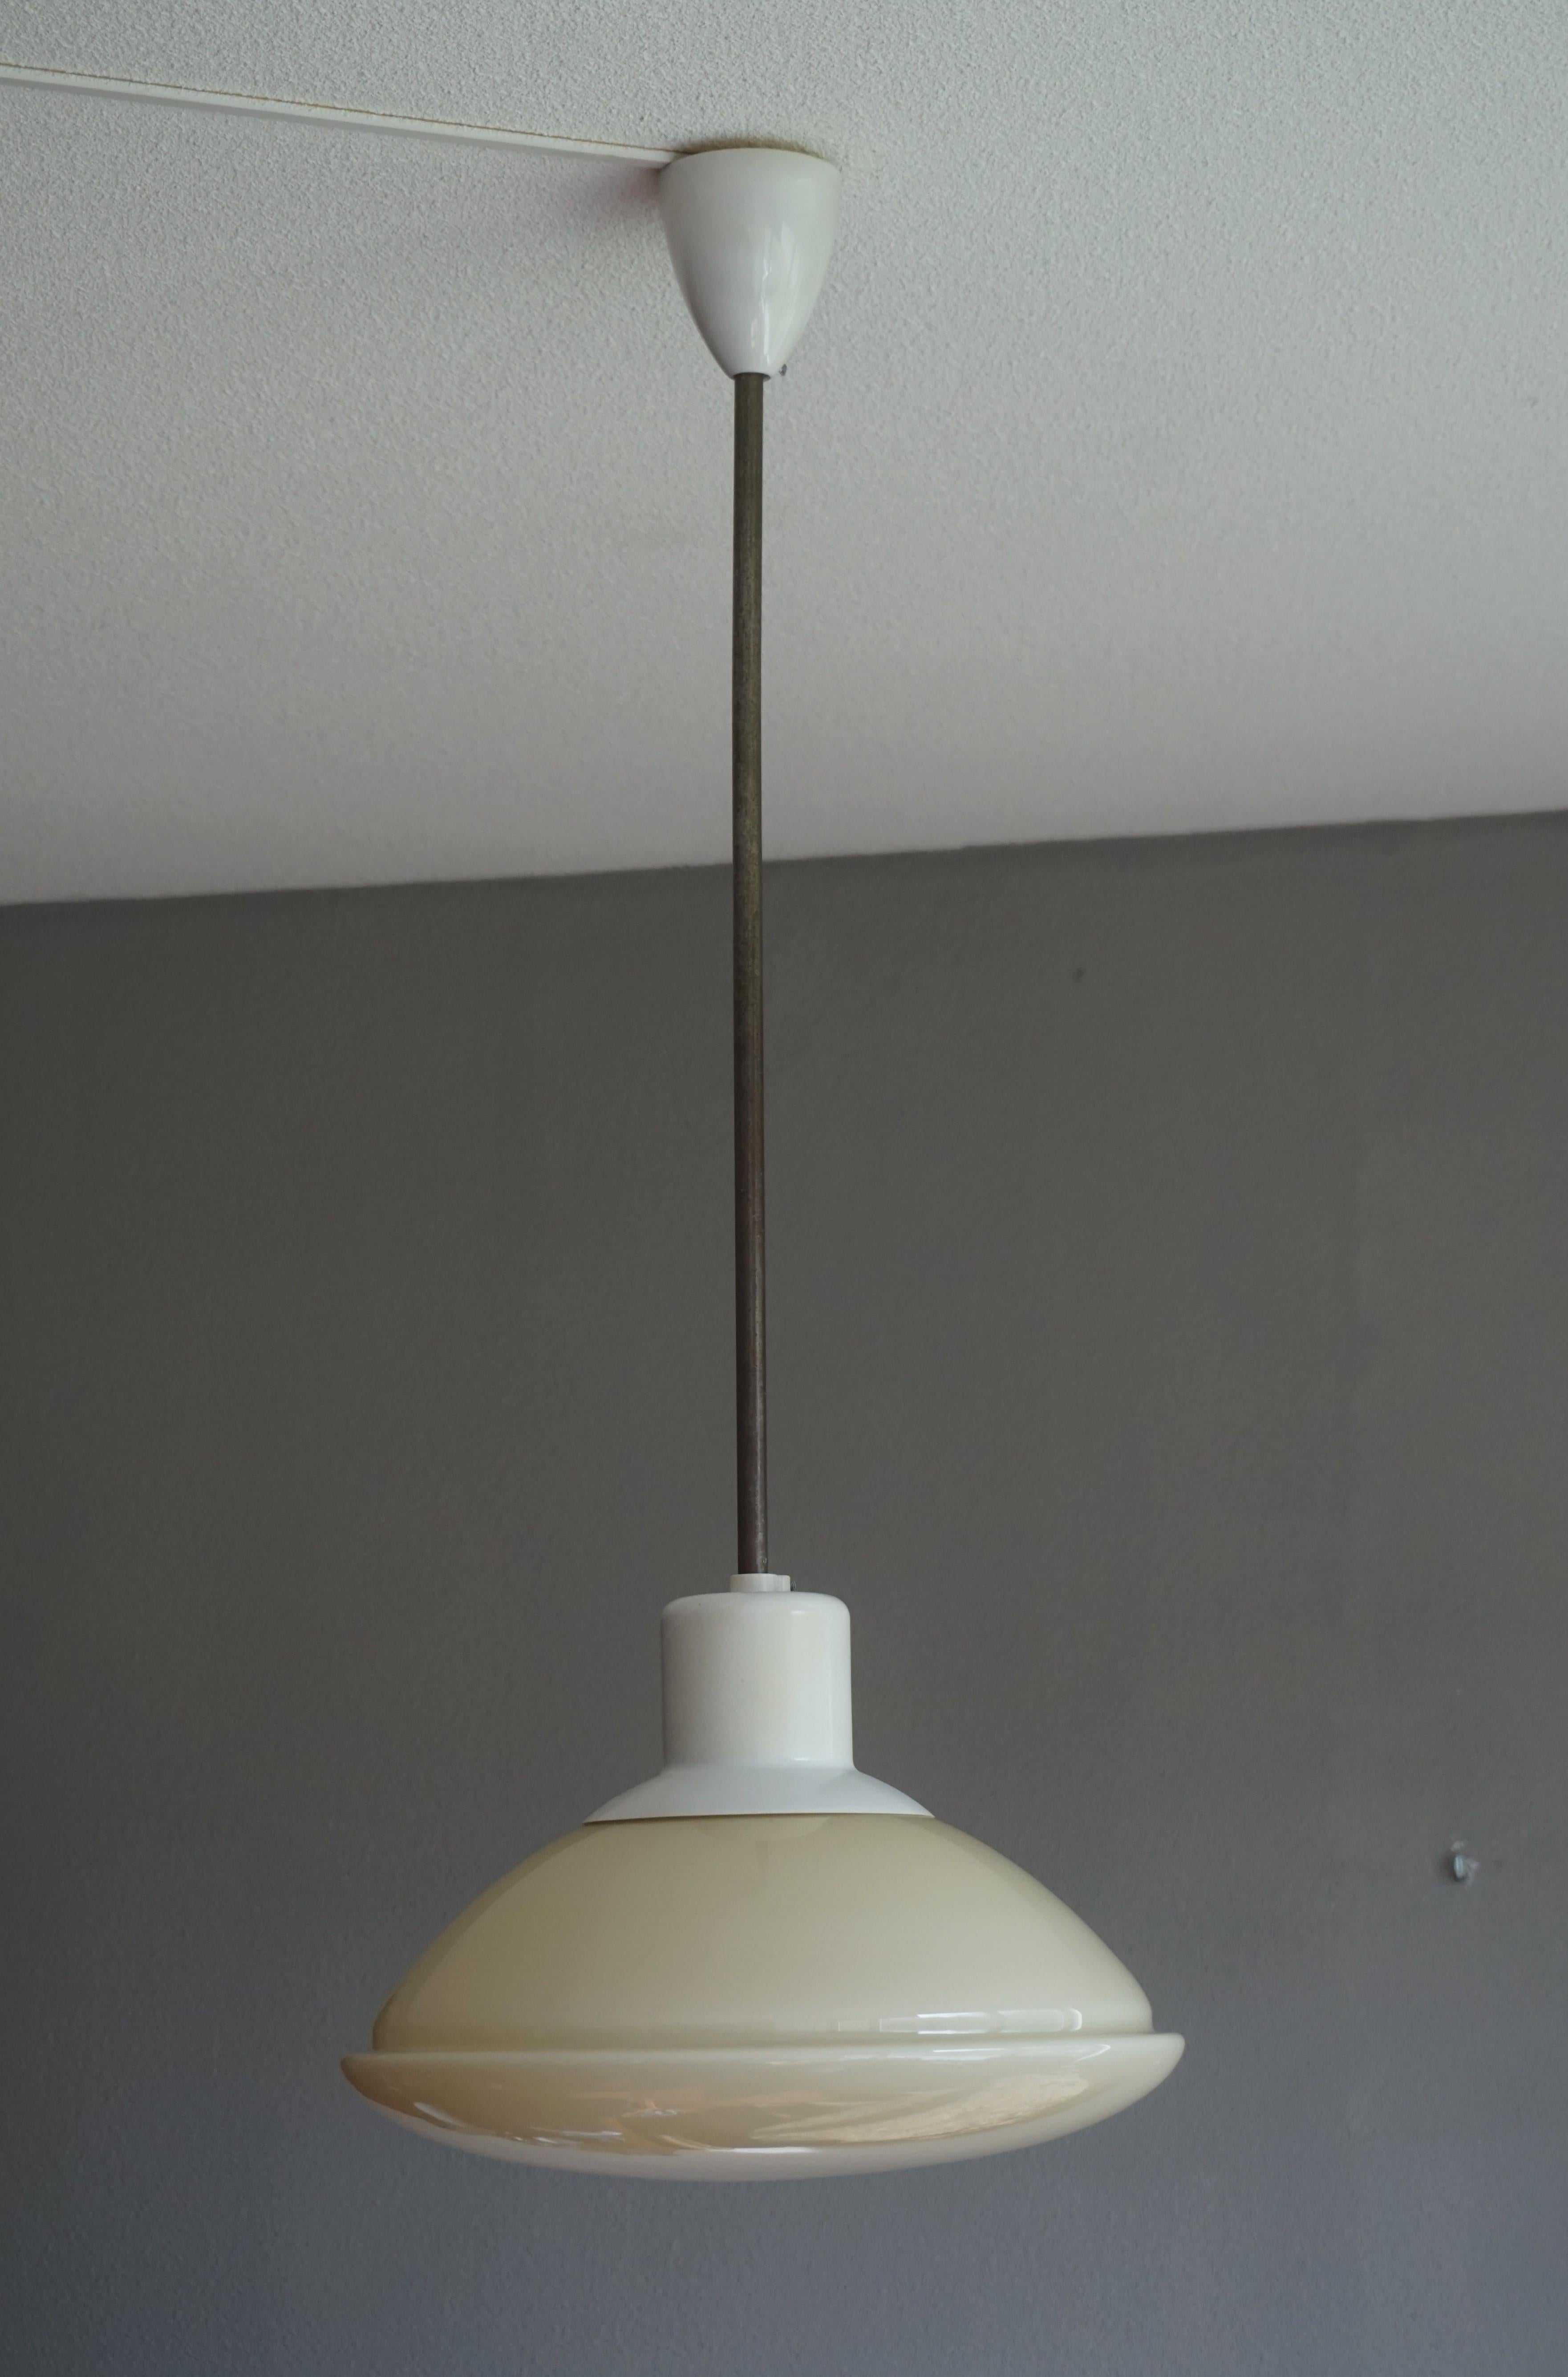 Beautiful 1950s light fixture with a mint condition, UFO shaped glass shade.

We are no specialists when it comes to Mid-Century Modern light fixtures, but whenever we get a chance to buy a truly stylish fixture from that era we will. For us, this